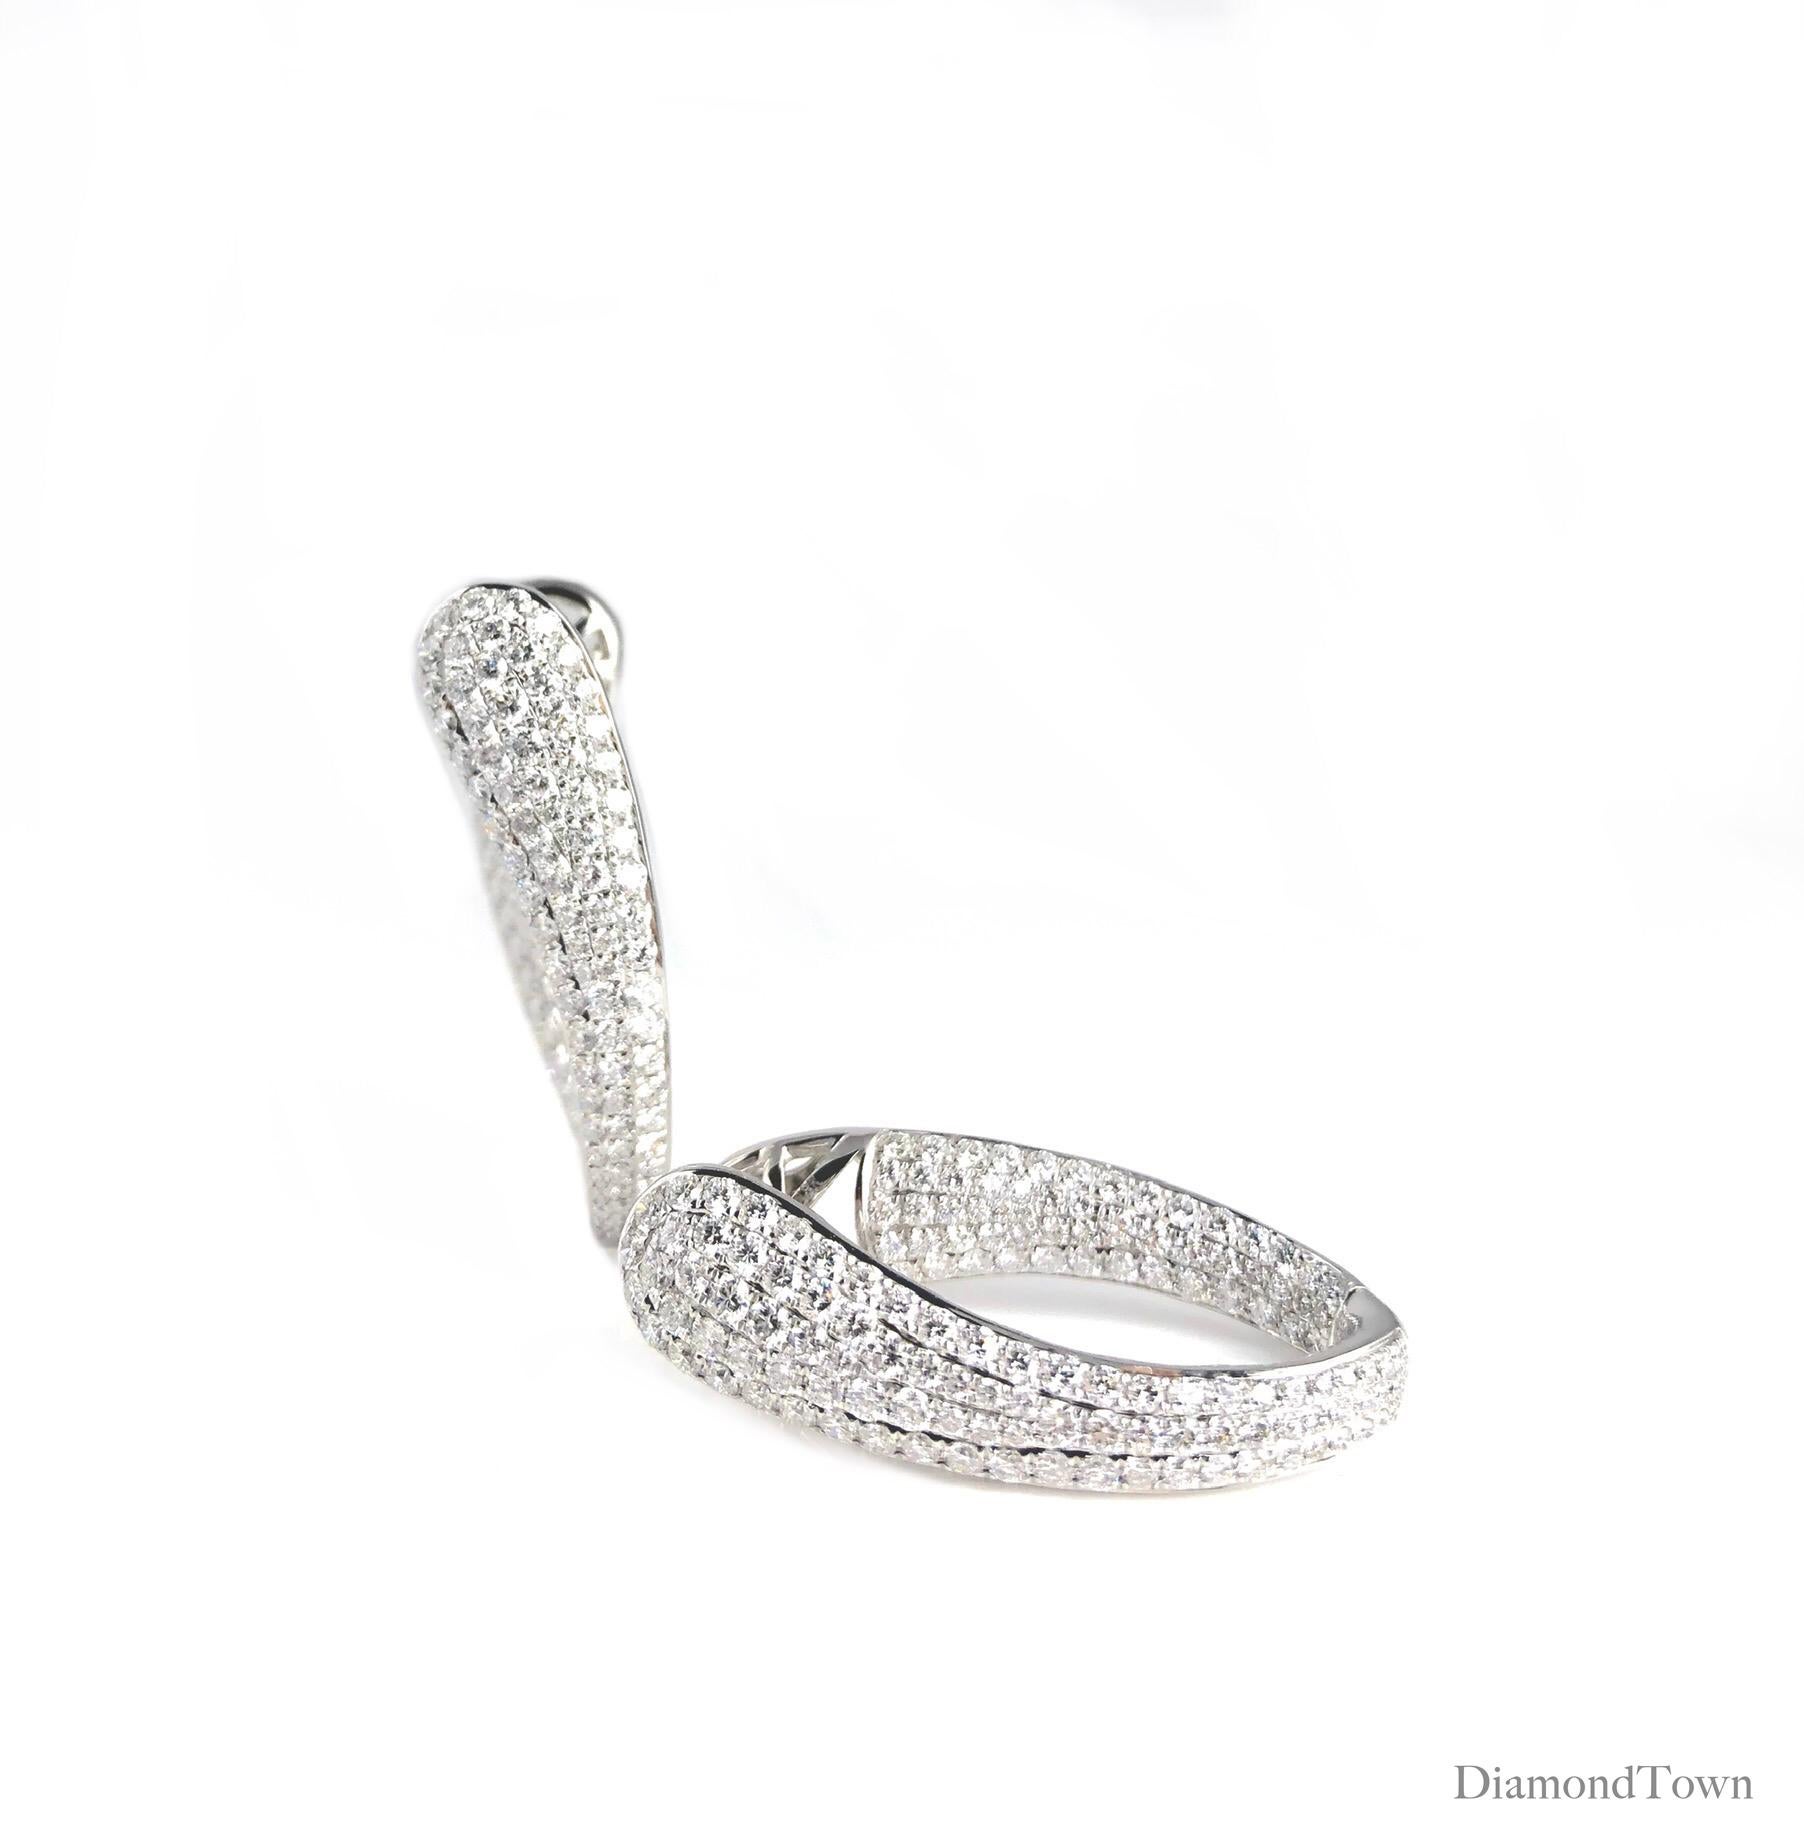 (DiamondTown) These sparkling hoop earrings shine with 4.28 carats of round diamonds adorning all the front-facing surfaces. Set in 18k White Gold. A modern look for a modern bride, or for the event of your choice!

Many of our items have matching